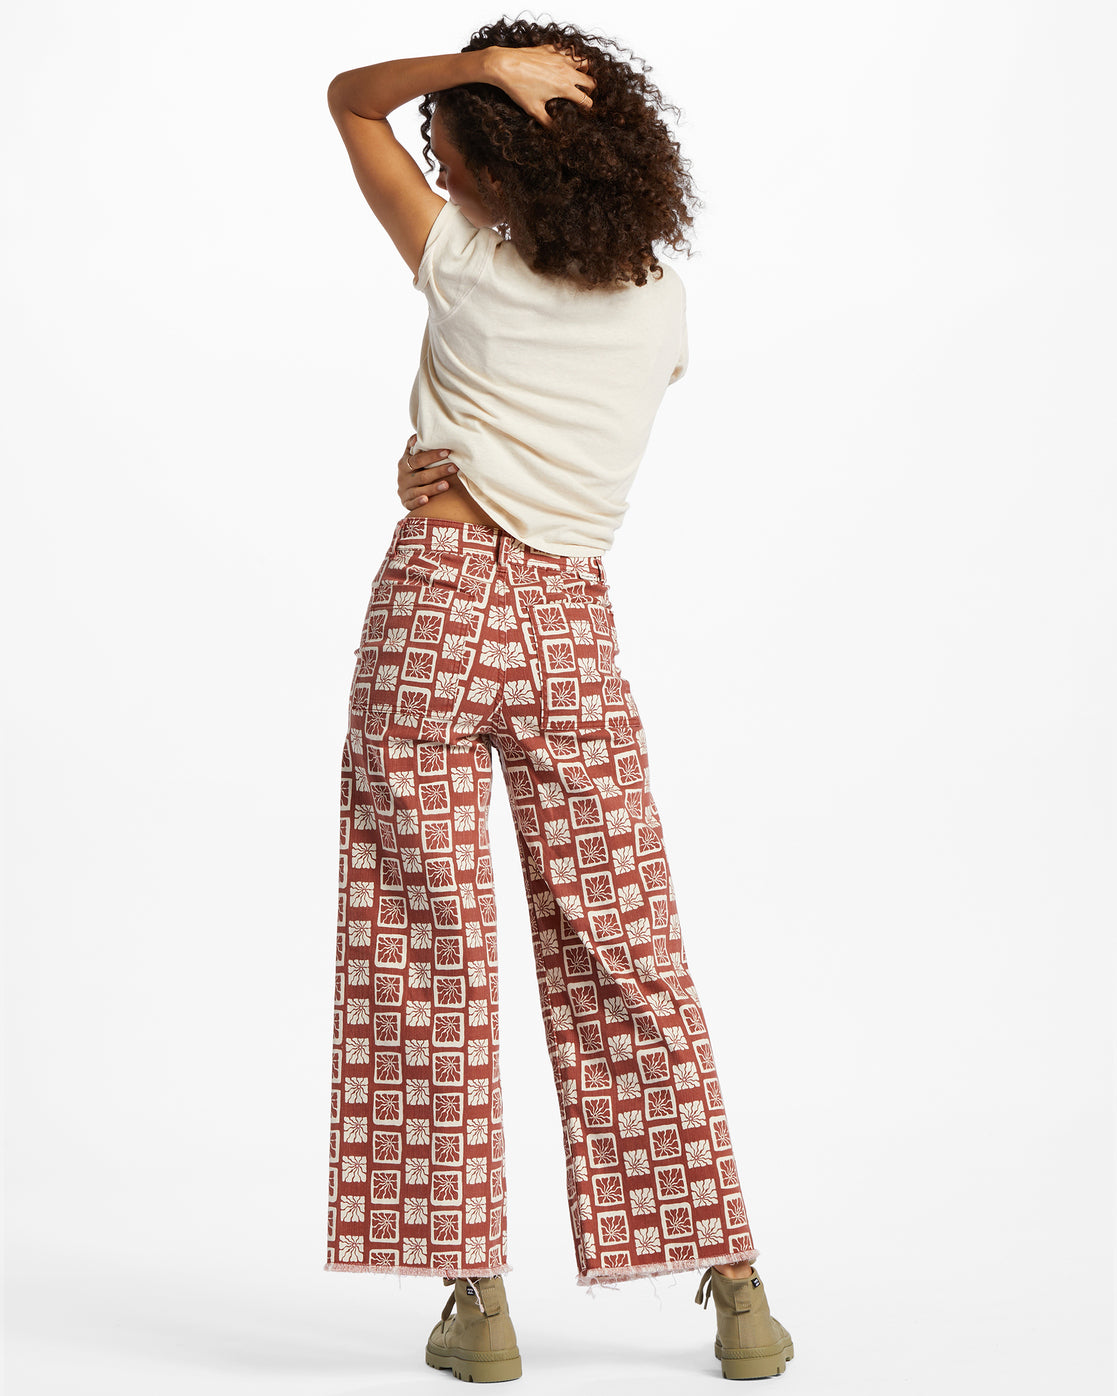 Best checked trousers for women - Stylish checked trousers